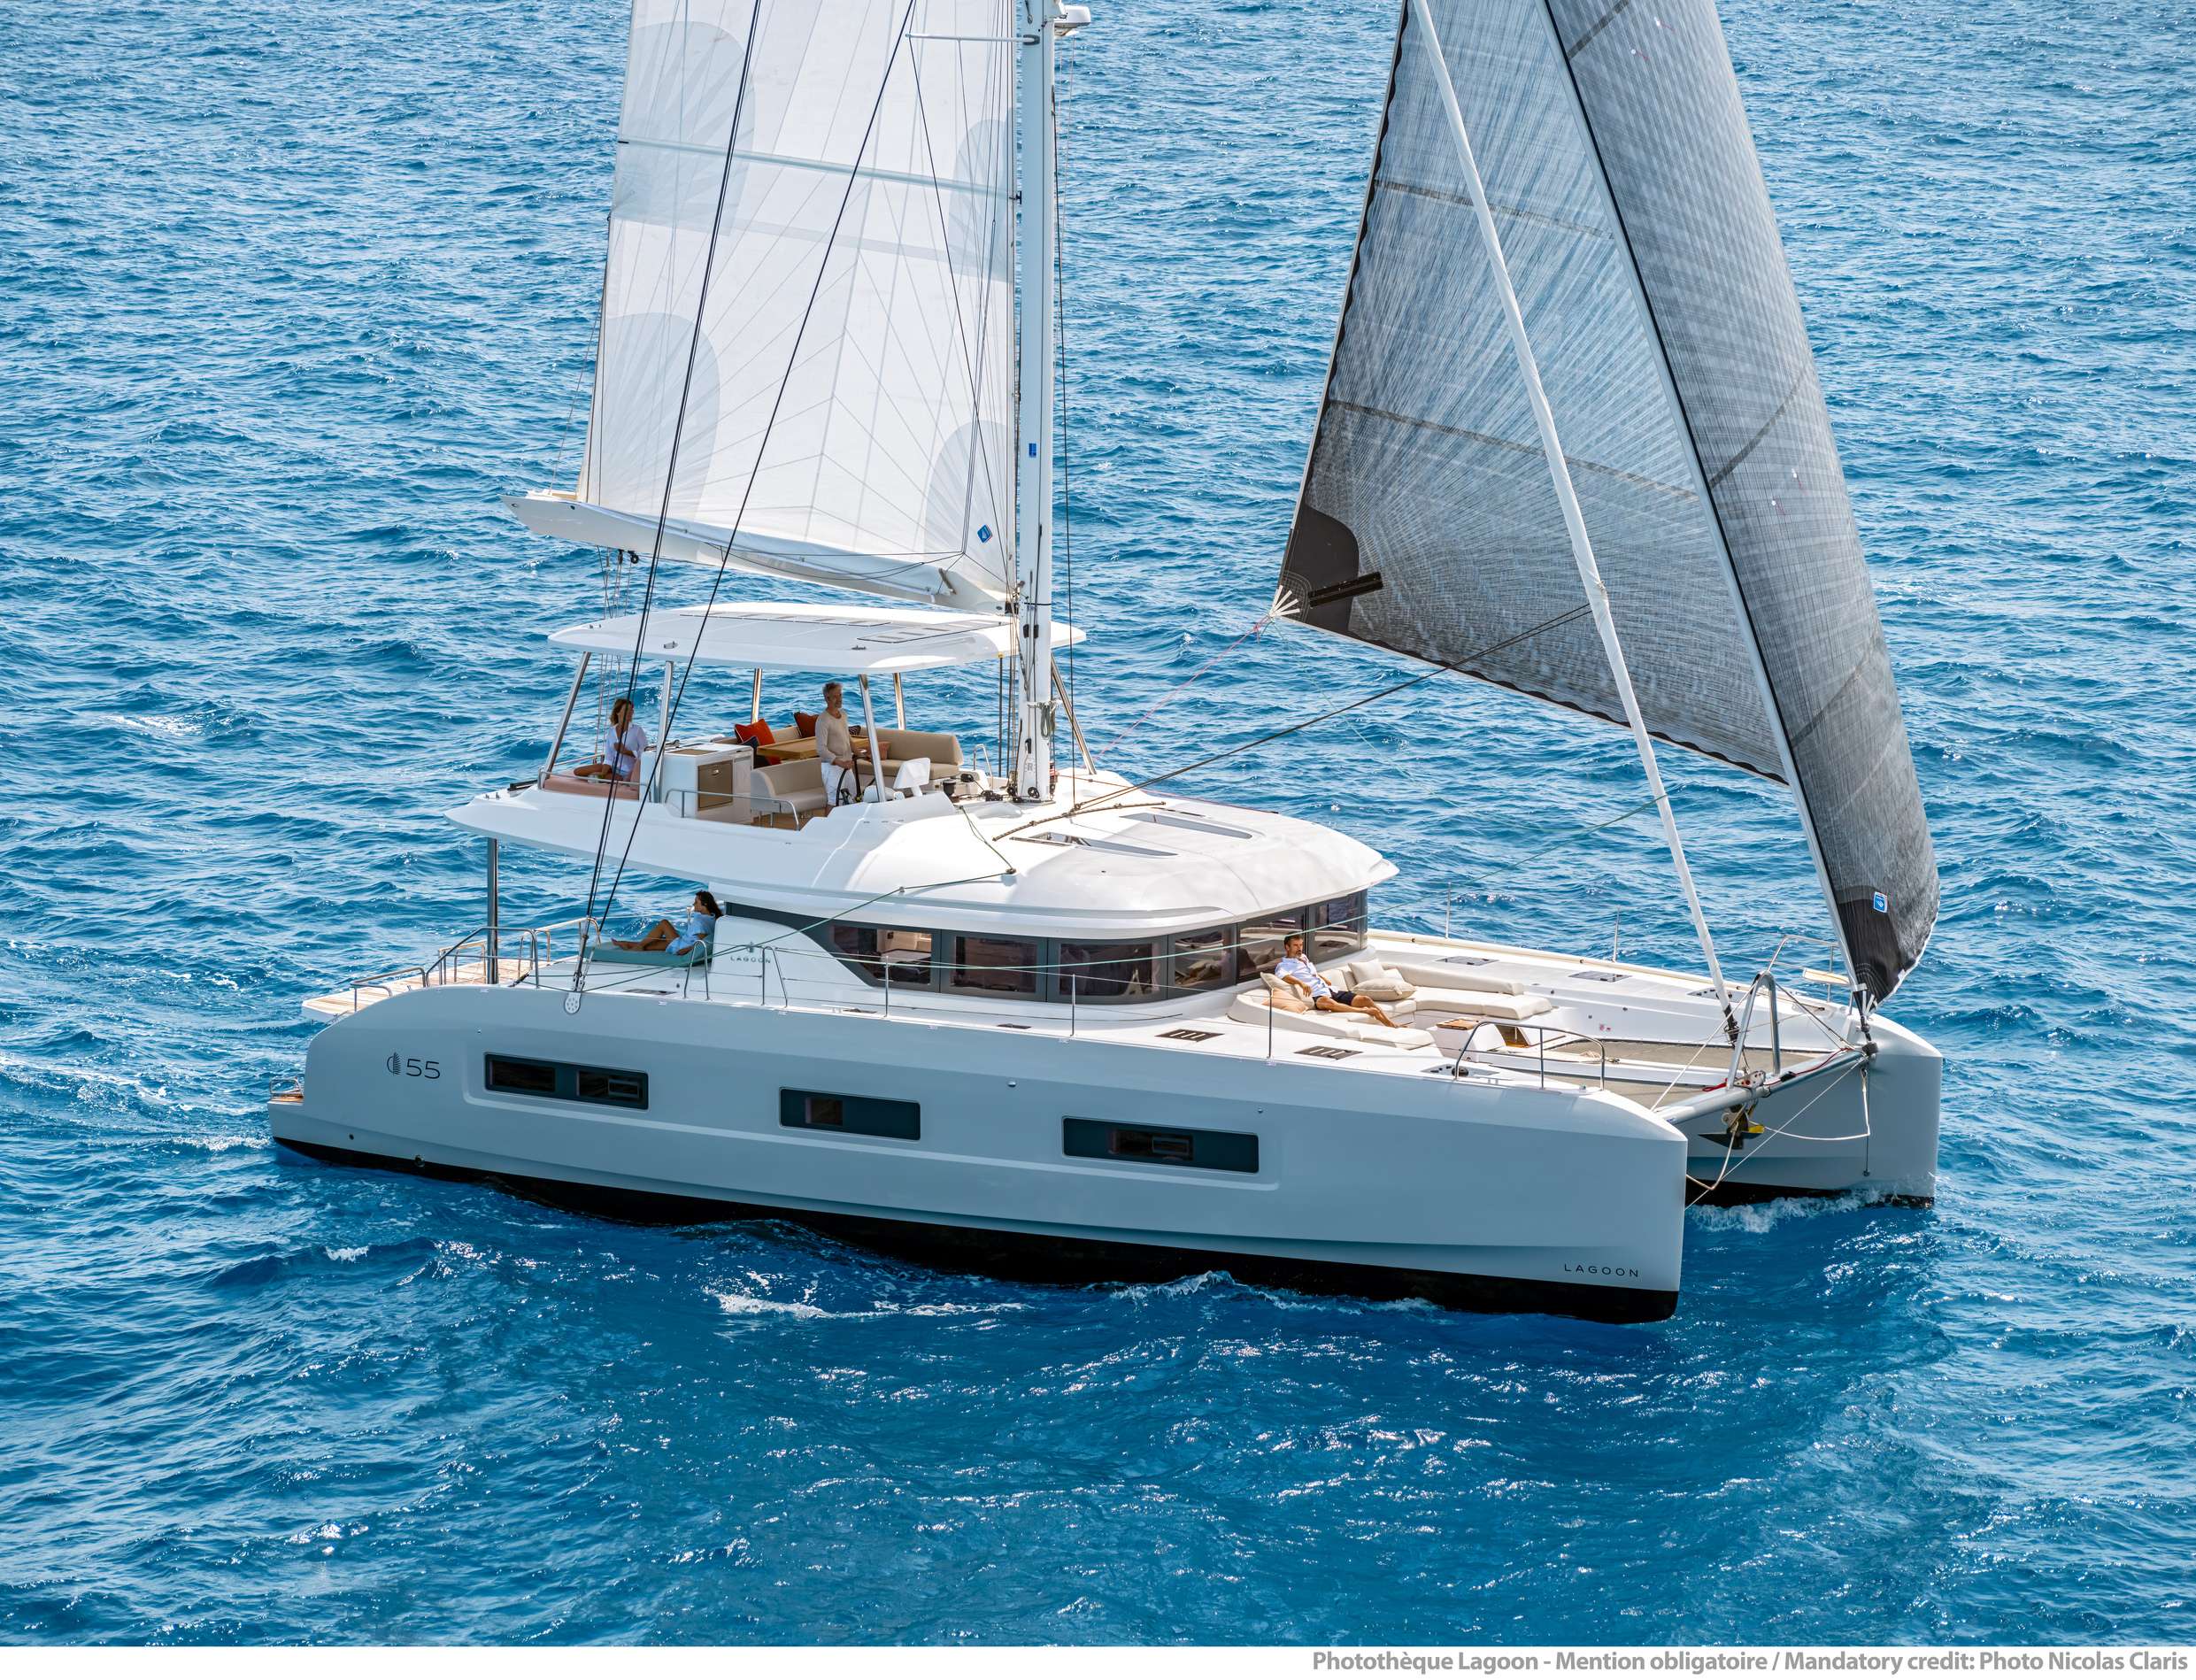 VALIUM 55 - Yacht Charter Athens & Boat hire in Greece 1